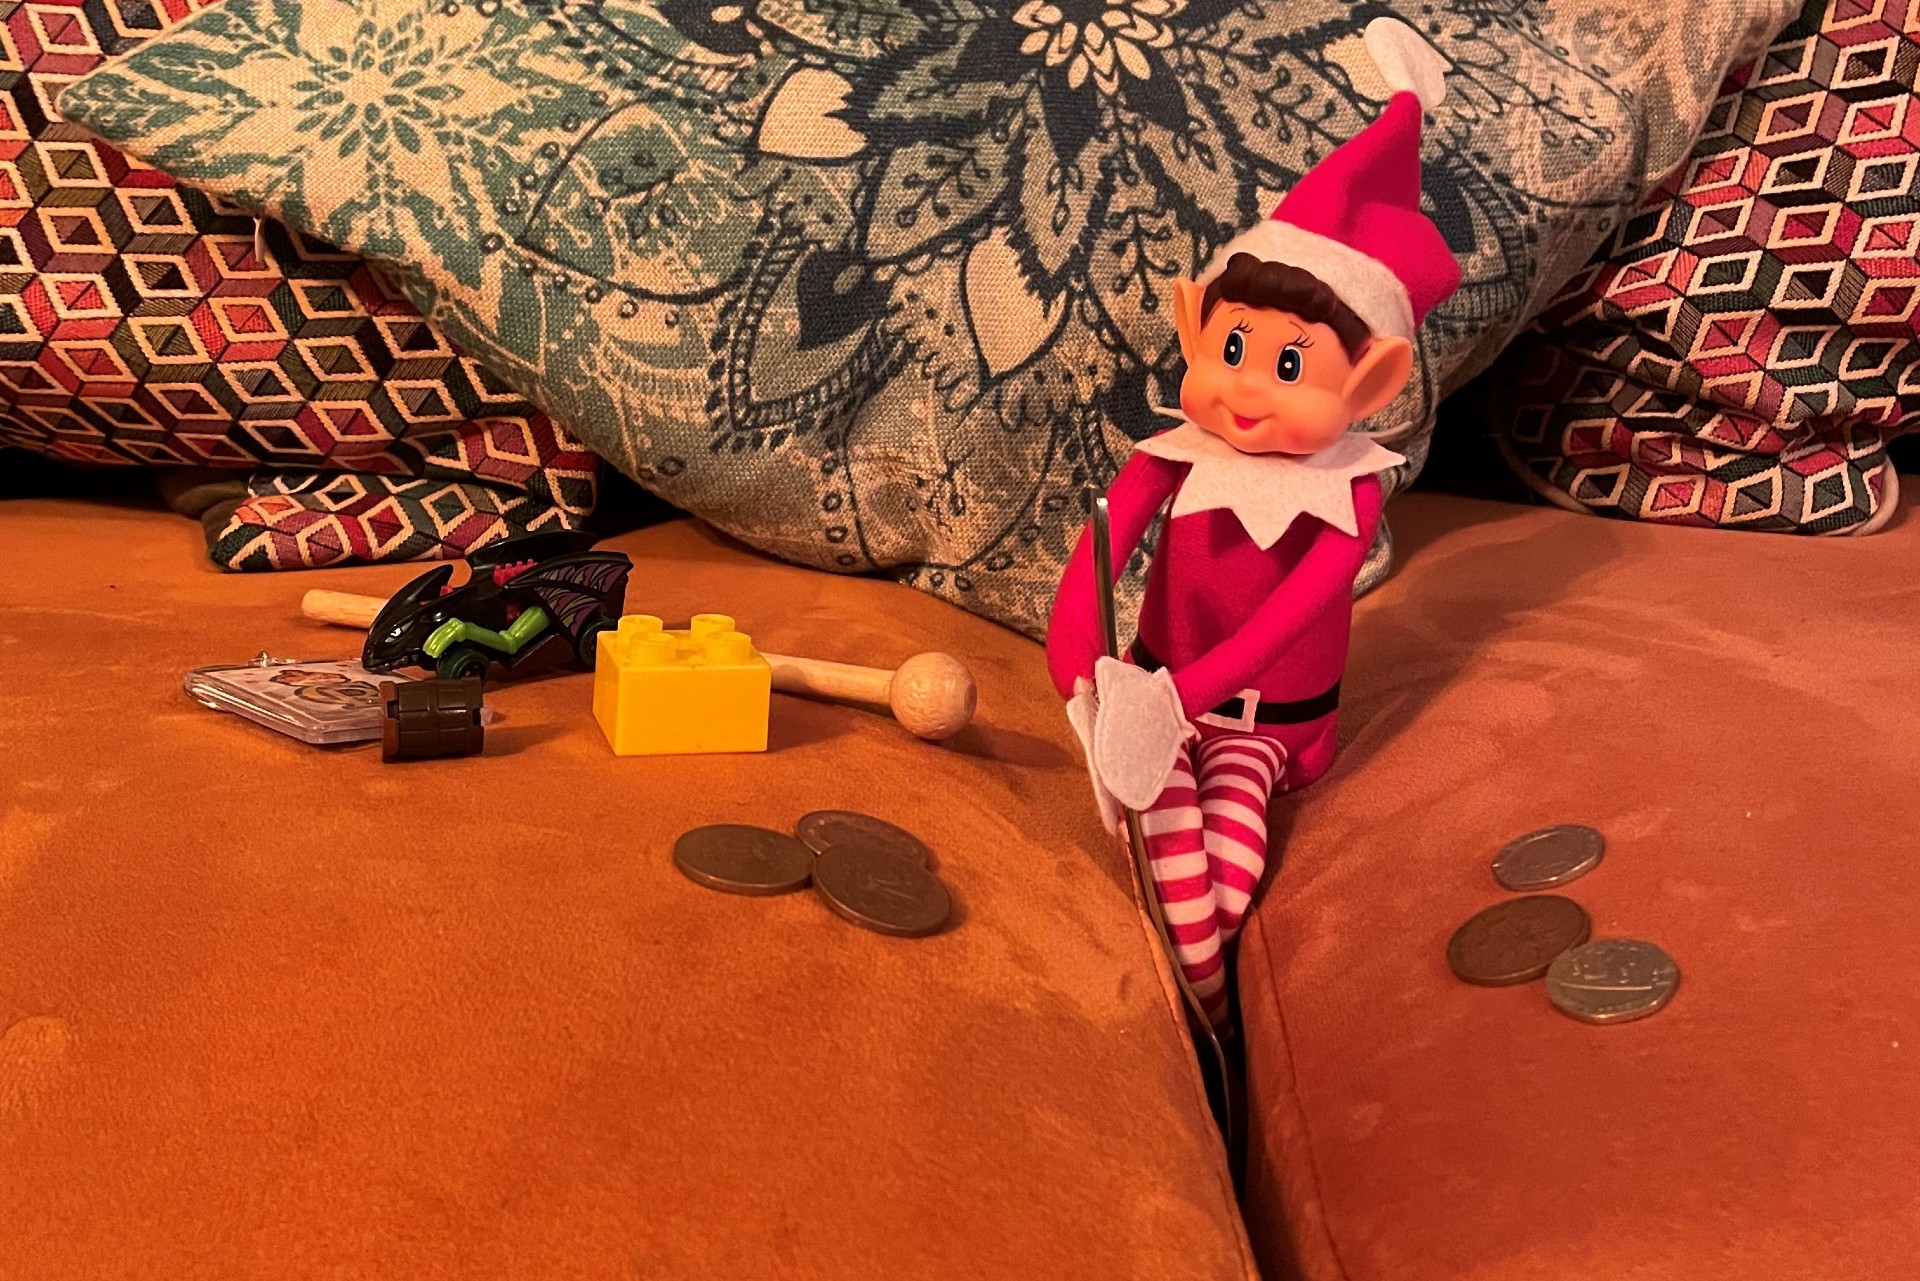 The elf on the shelf digging in between the couch cushions for treasure. A pile of coins and toys lie on either side of the elf